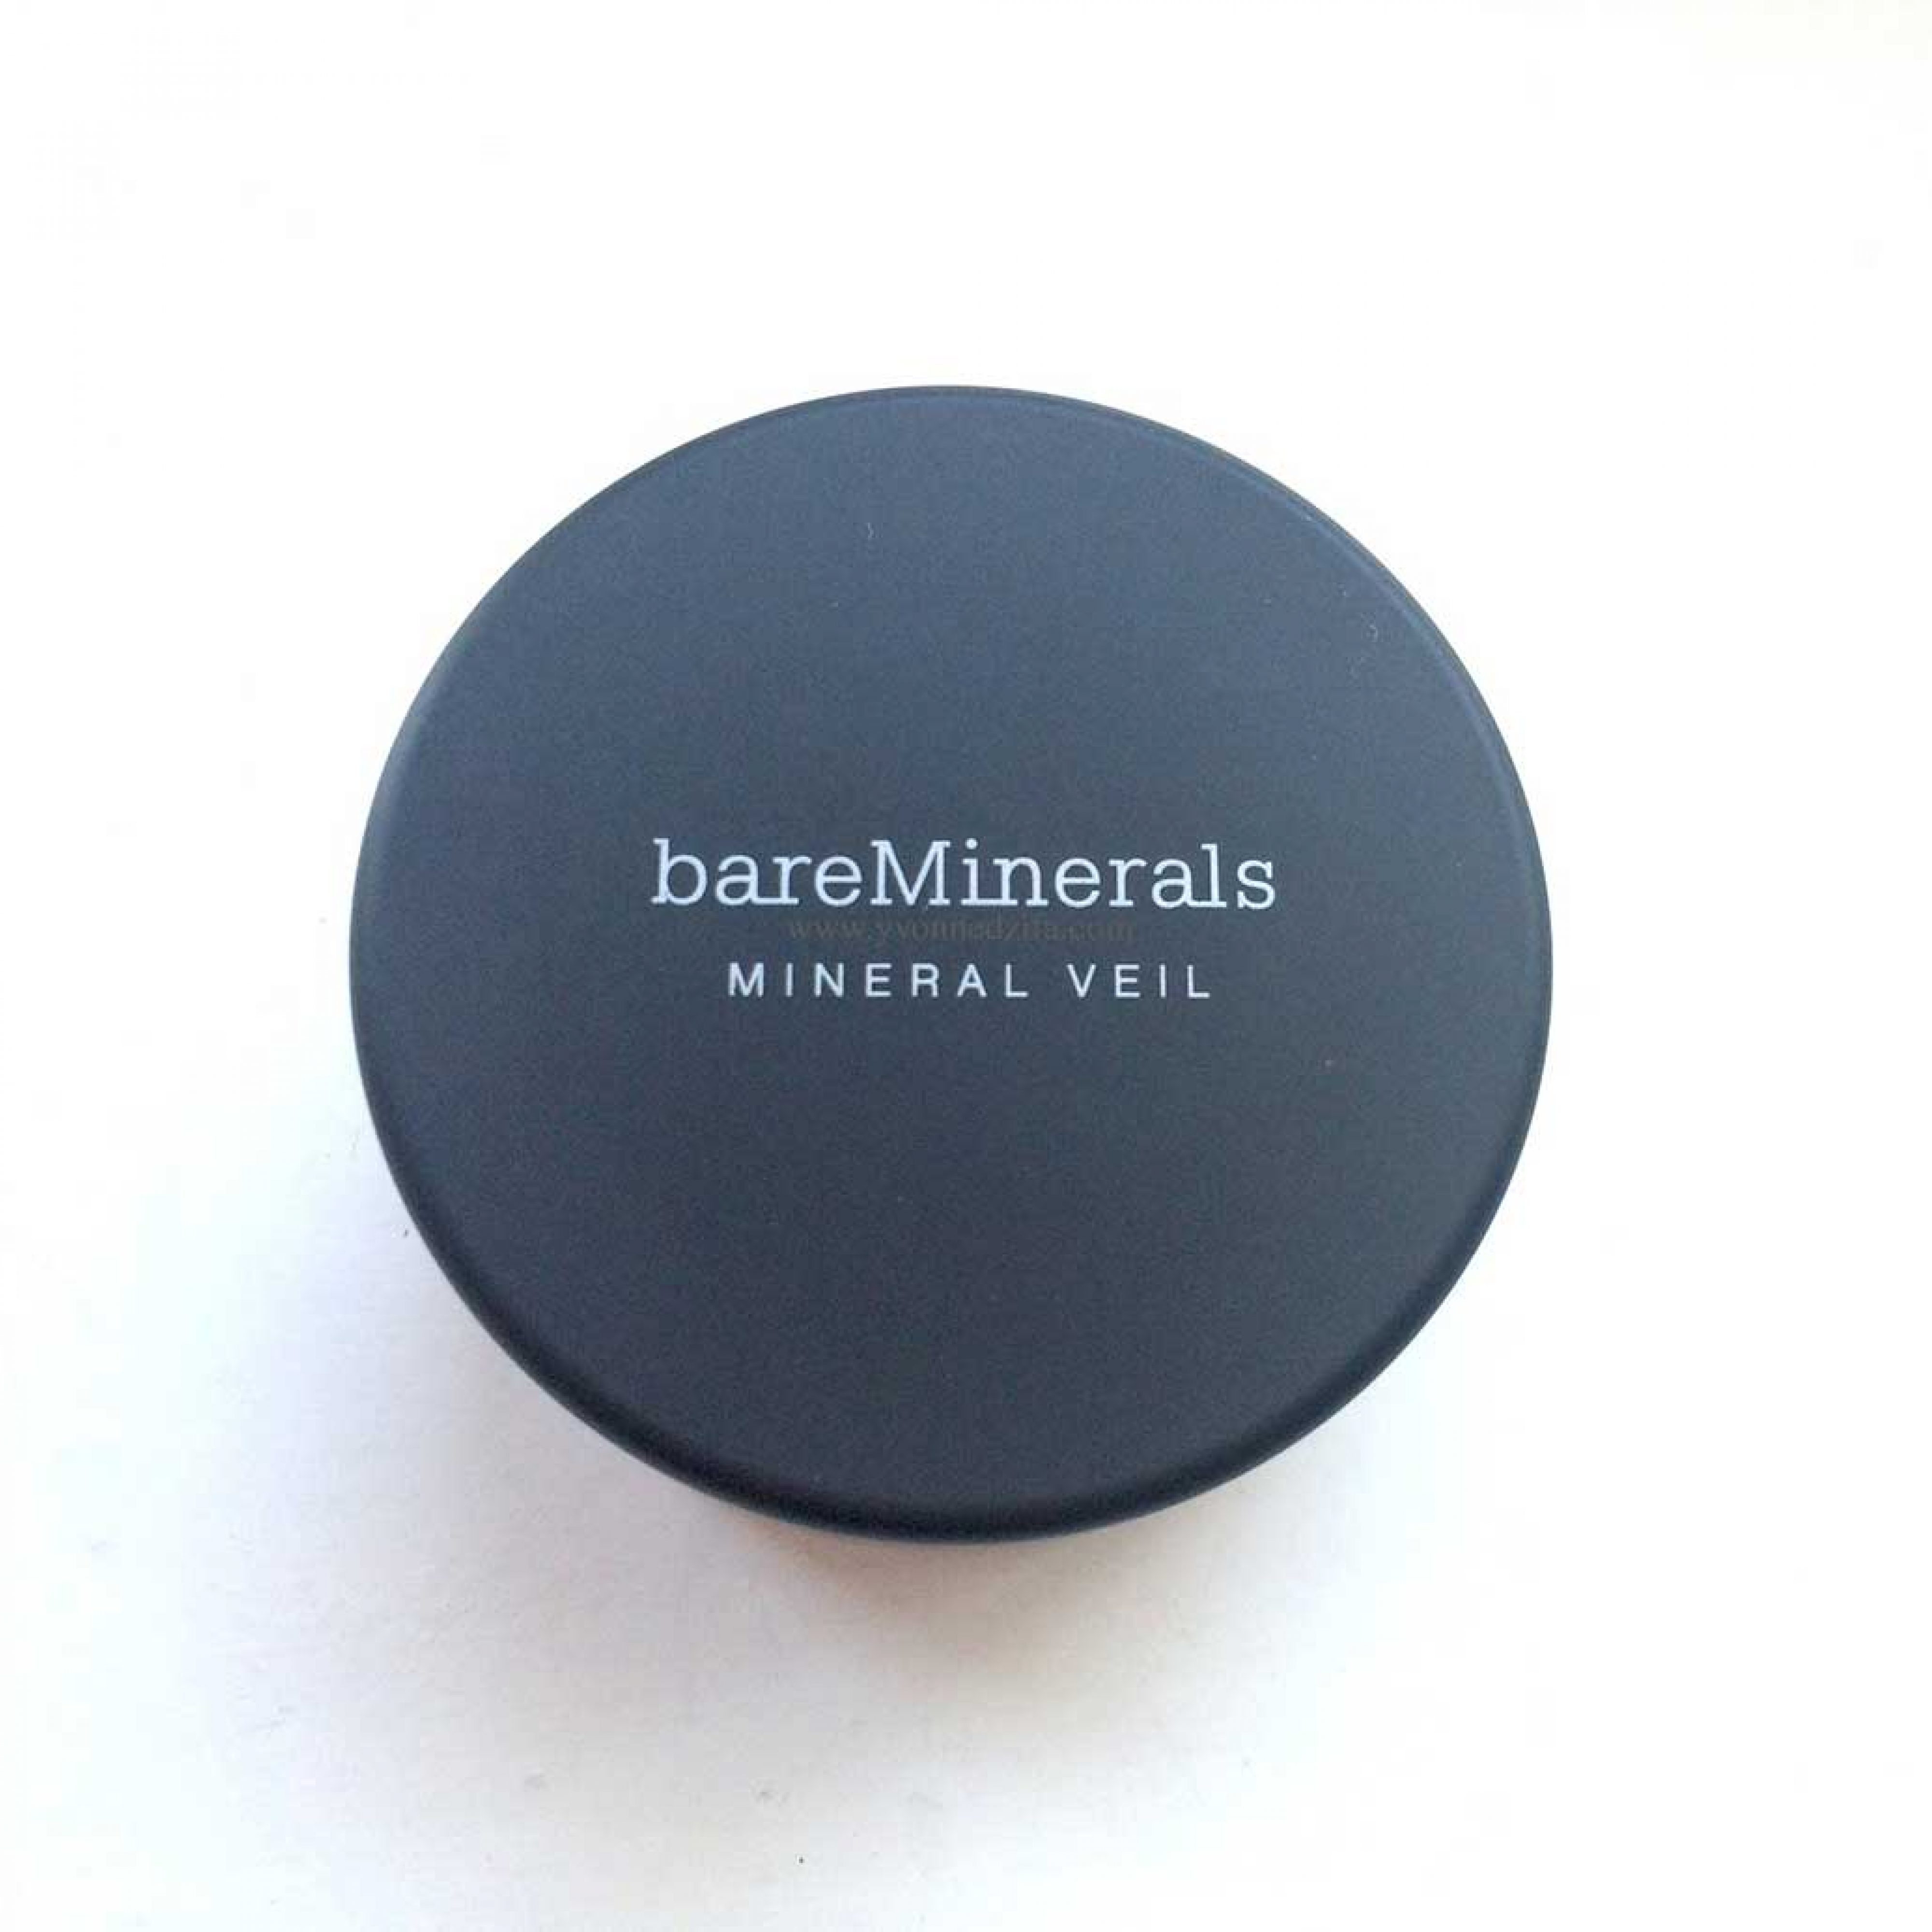 Why I Love bareMinerals Tinted Mineral Veil